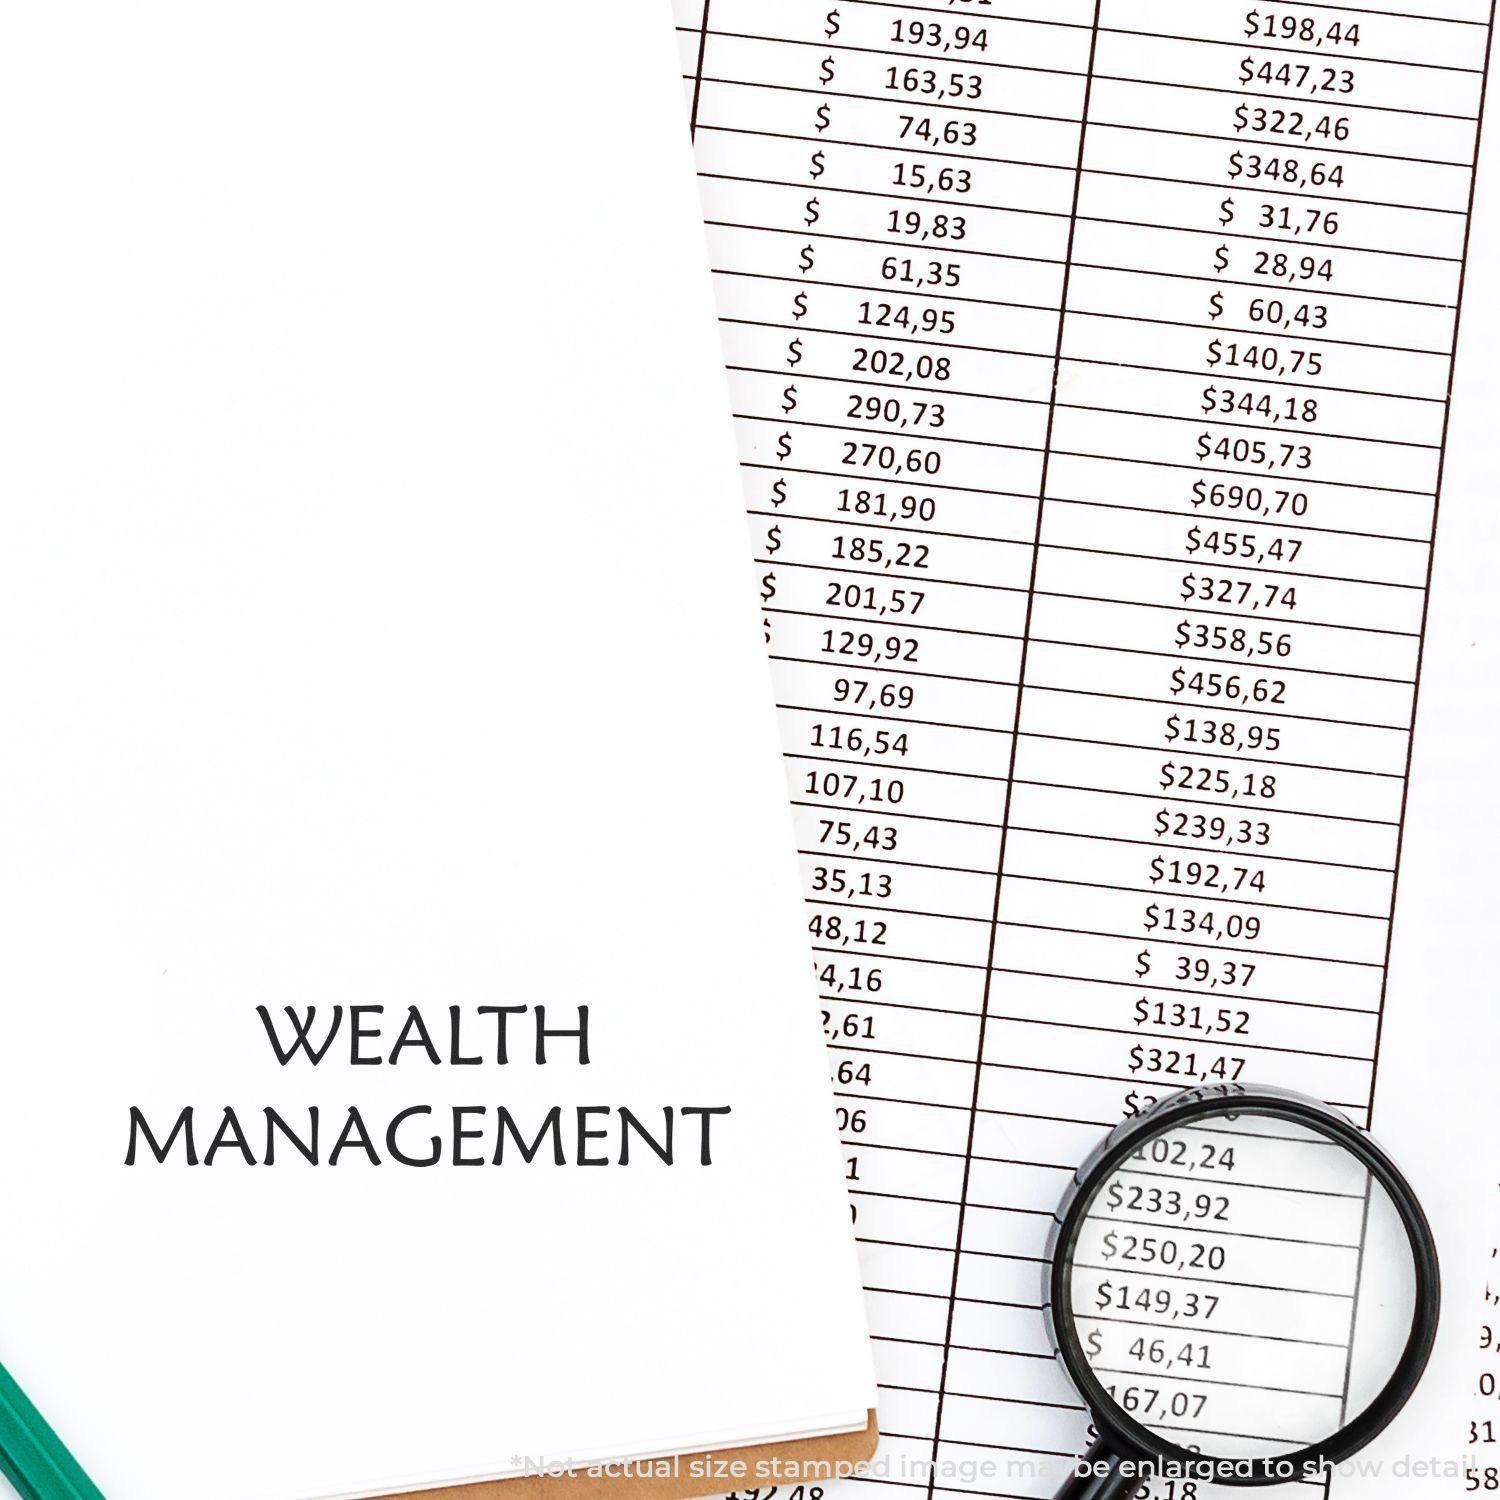 A stock office rubber stamp with a stamped image showing how the text "WEALTH MANAGEMENT" in a large font is displayed after stamping.